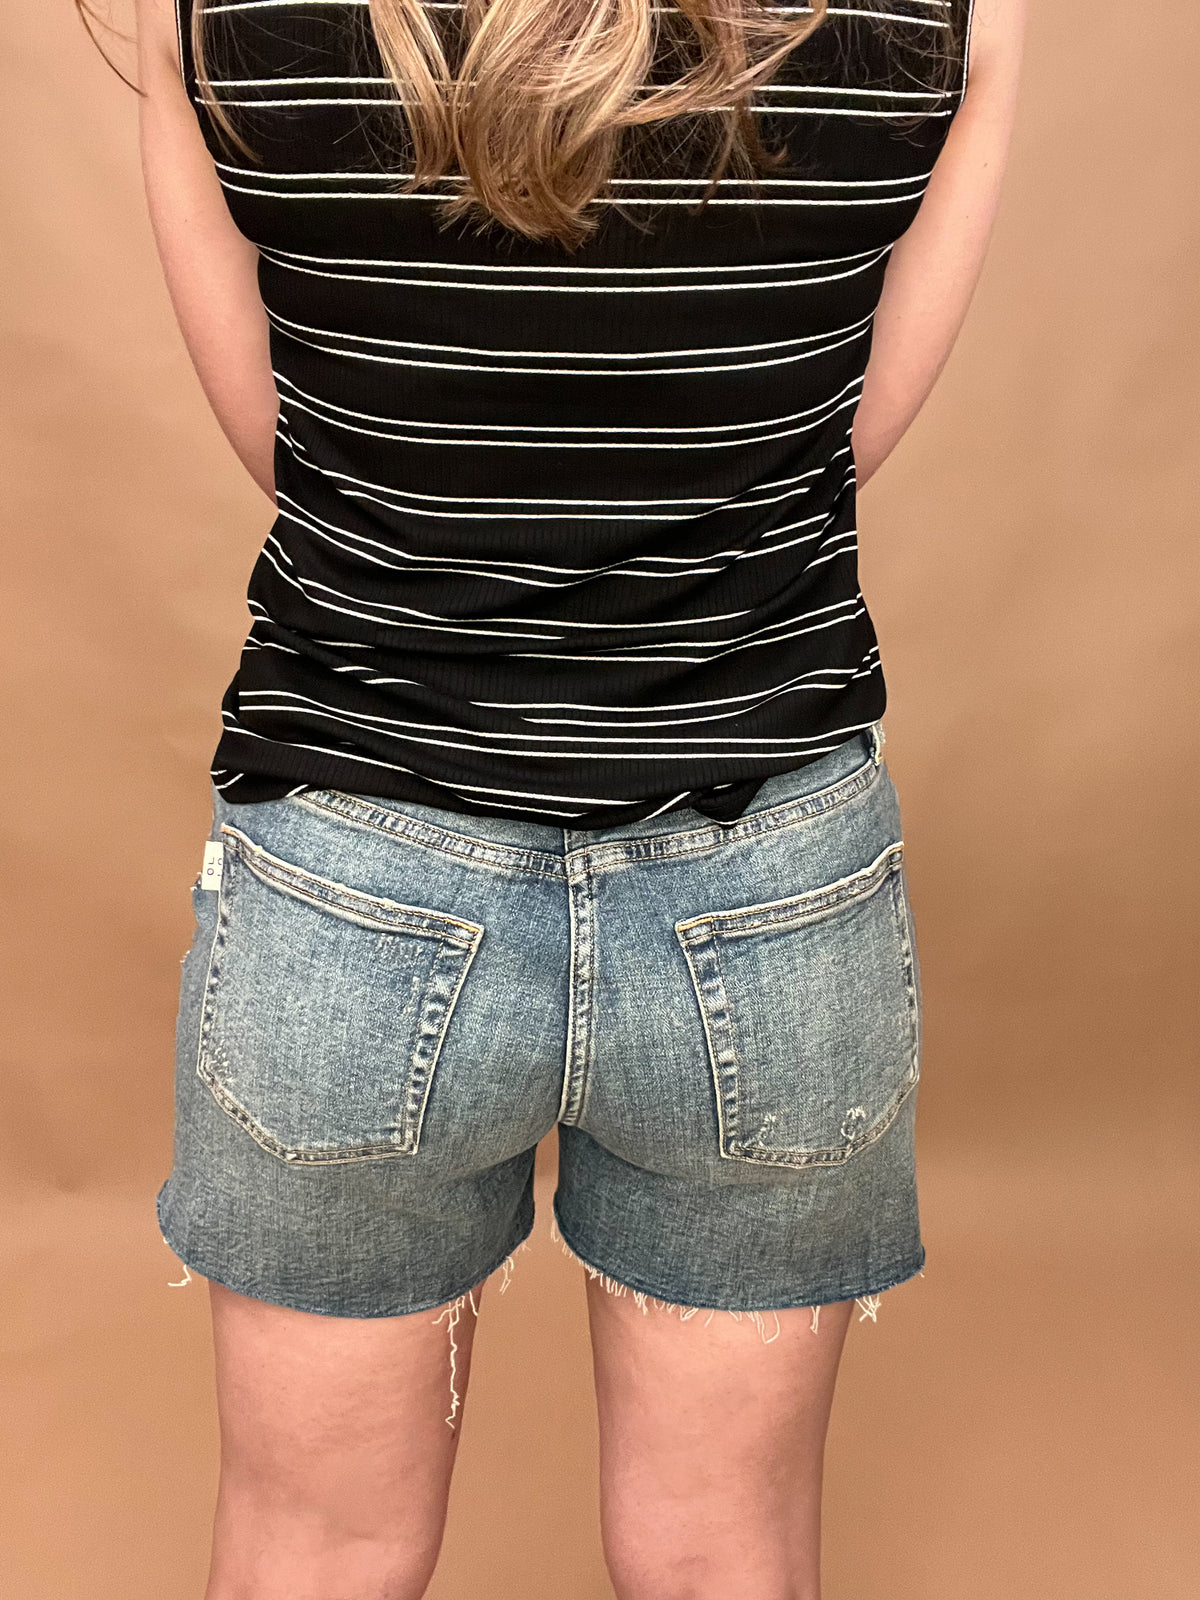 Our best selling Oliver Logan Denim Cut Above shorts are back in stock and ready for warm weather!&nbsp; The relaxed, comfy fit sits high on the waist and cuts off at the thigh. Made from yarn sourced from the Better Cotton Initiative (BCI), these denim shorts feature a buttoned fly and raw hem.&nbsp;